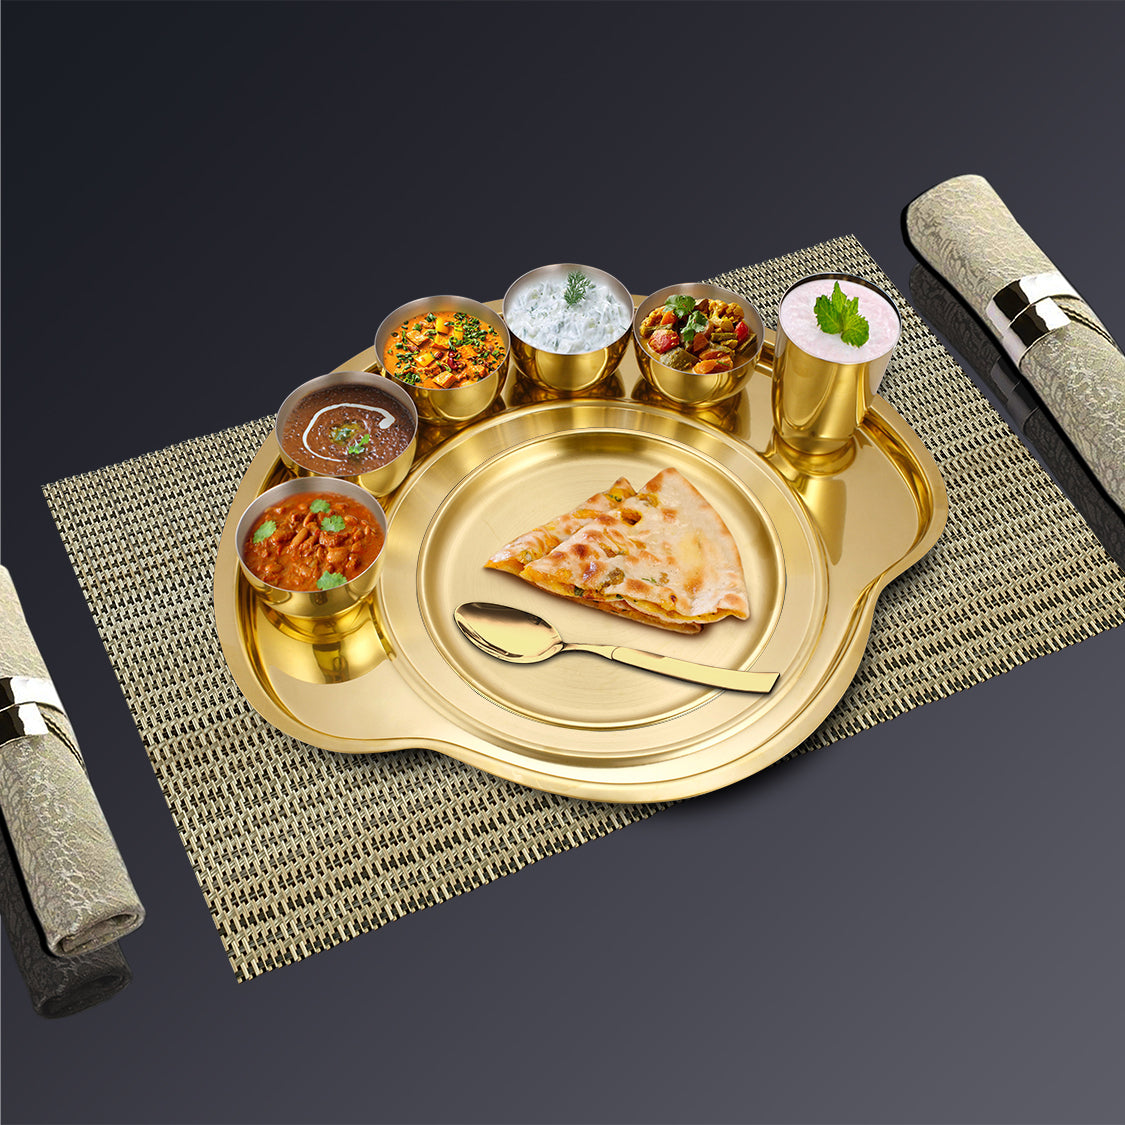 Stainless Steel Thali Set (1 Person) with Gold PVD Coating Nifty